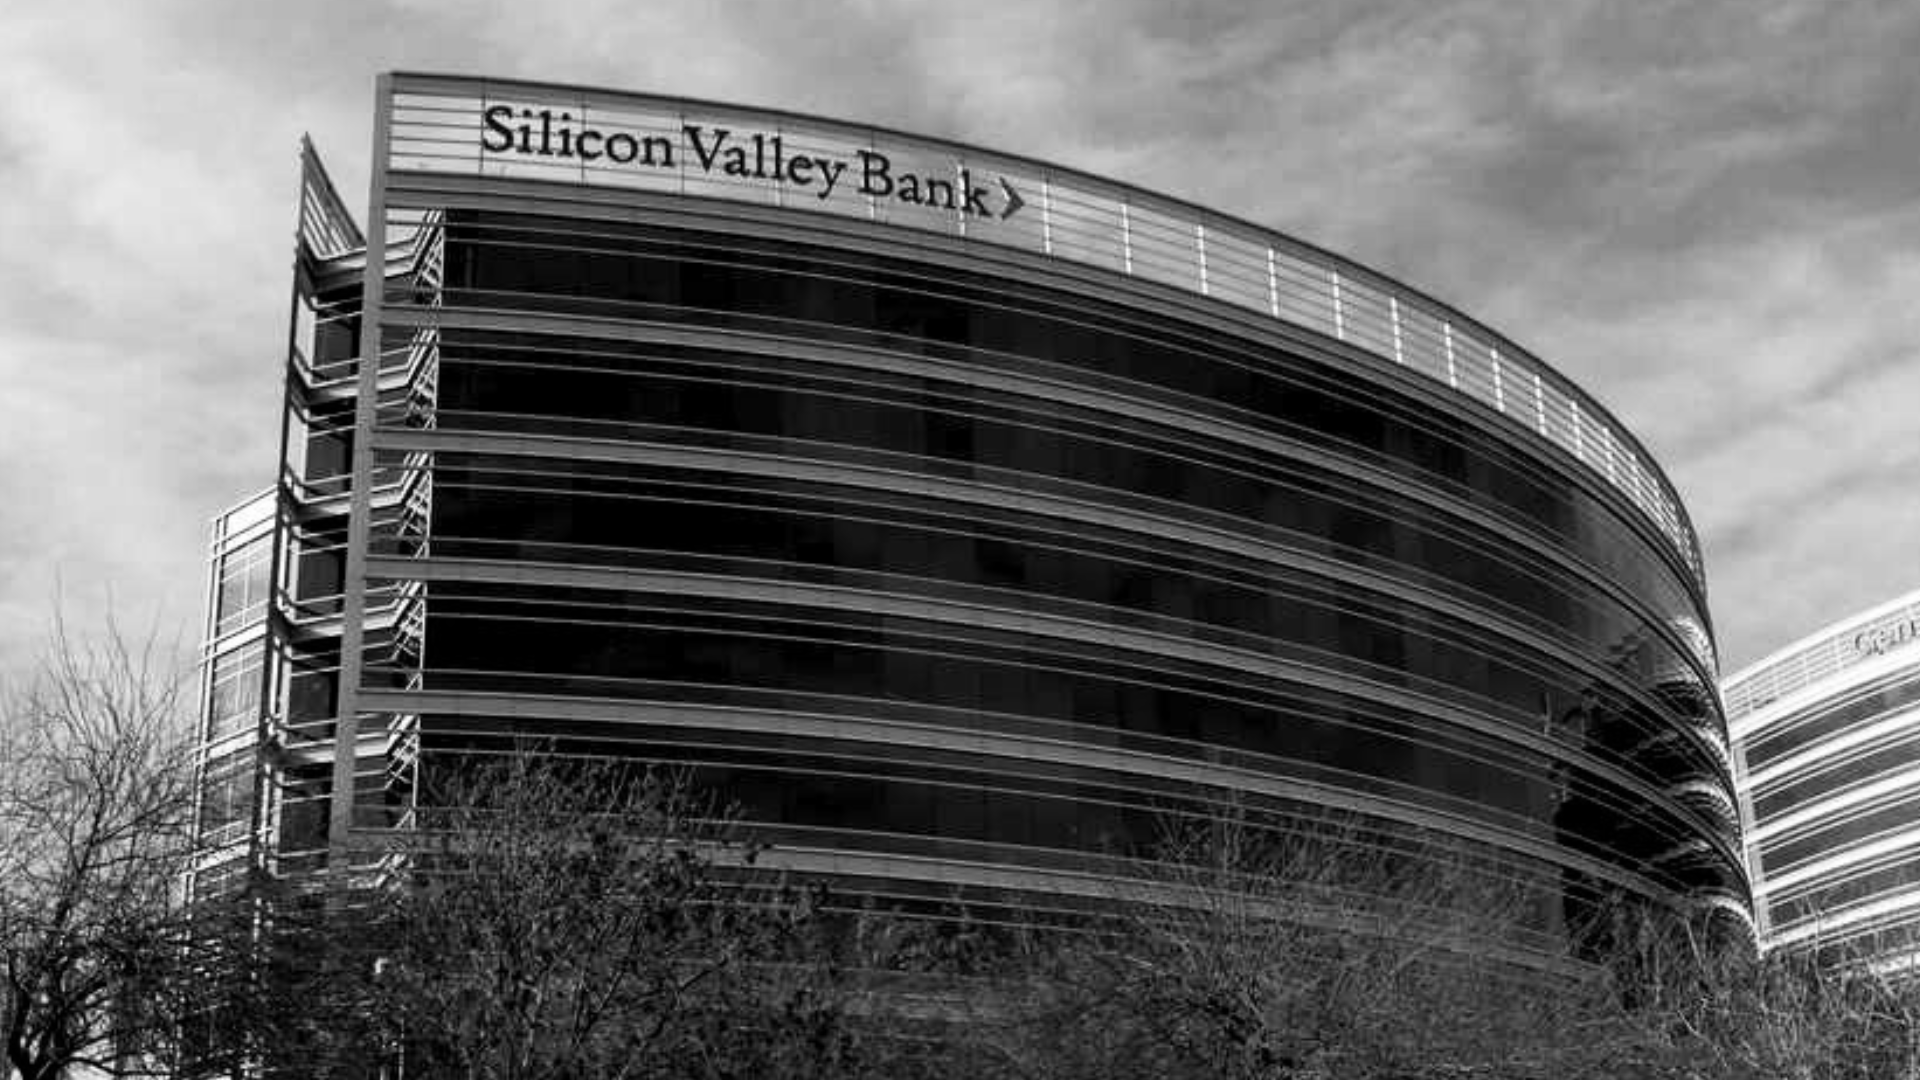 Silicone Valley Bank building in black and white